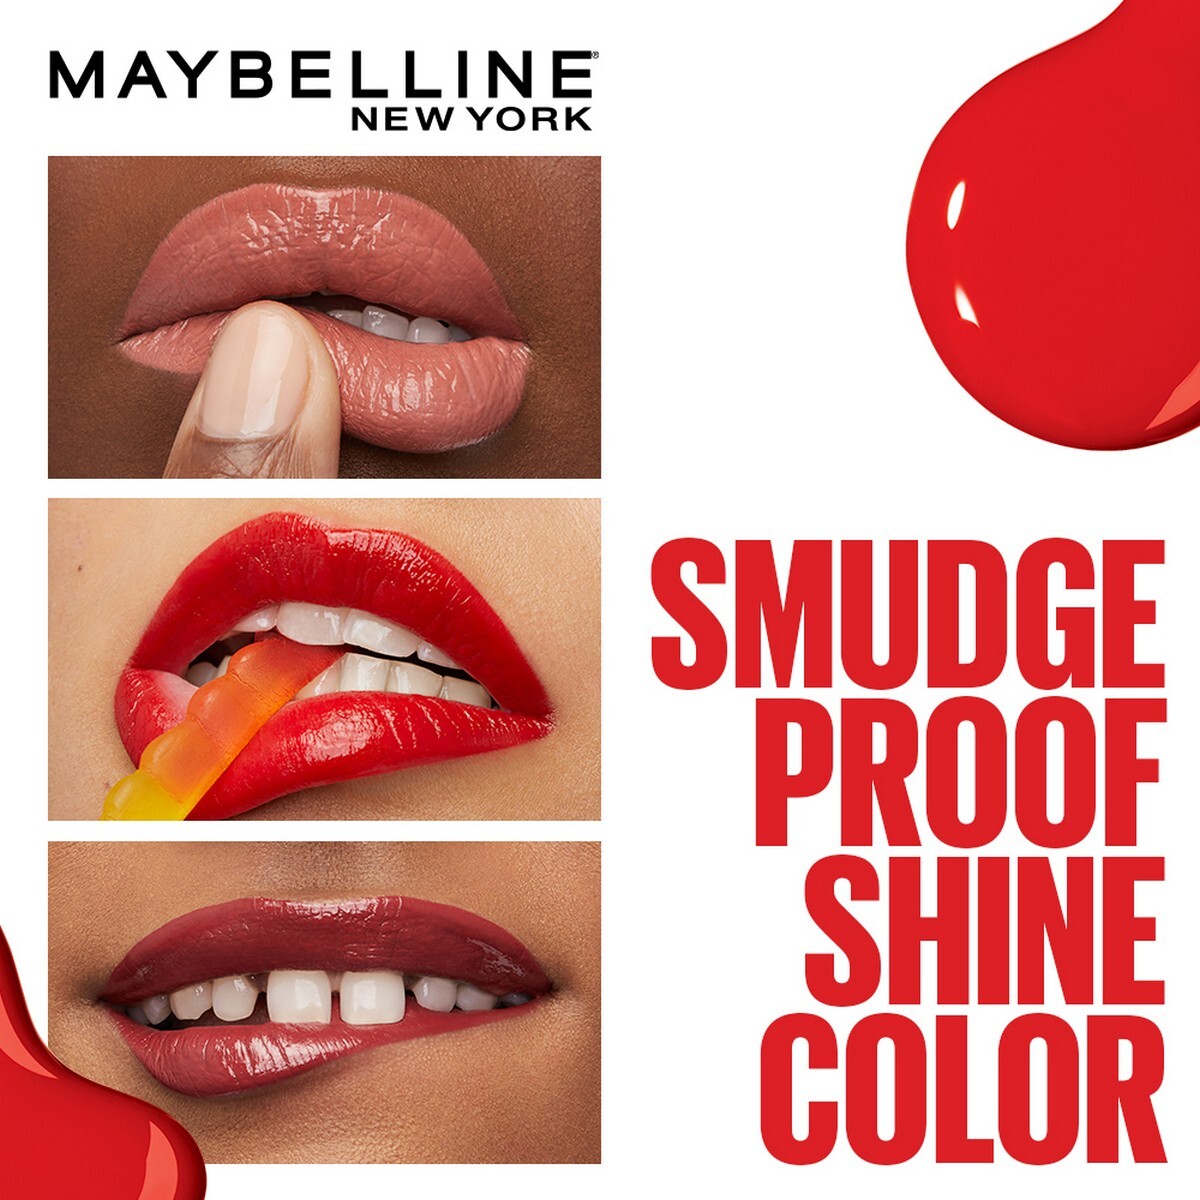 Maybelline Superstay Vinyl Ink Liquid Lipstick, Red Hot , High Shine That Lasts for 16 HRs , Enriched With Vitamin E & Aloe